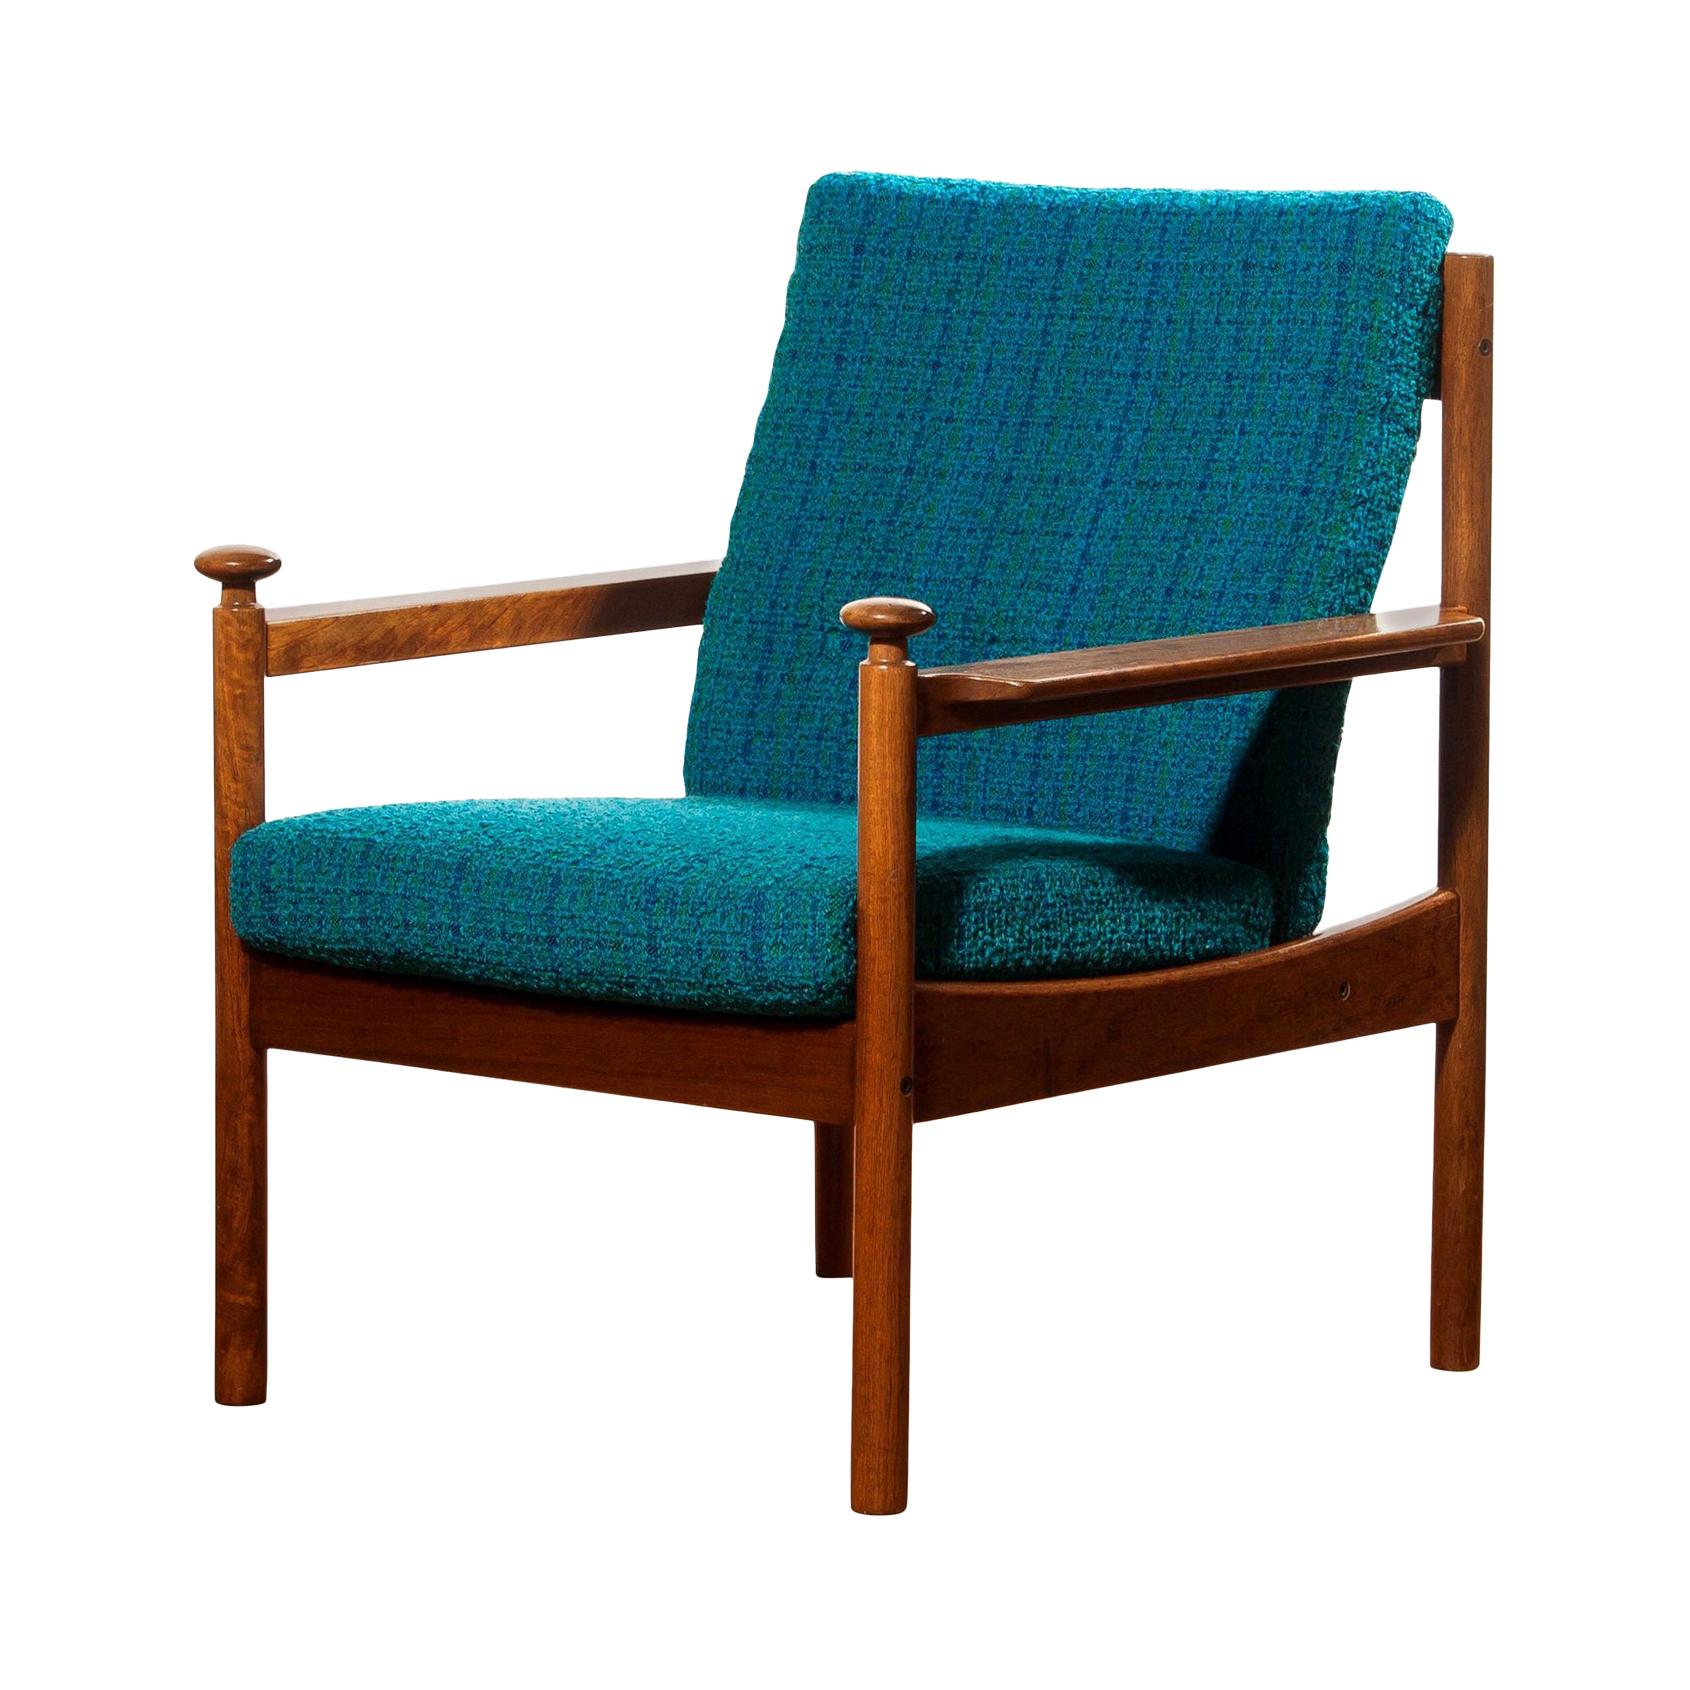 Beautiful chair designed by Torbjørn Afdal for Sandvik & Co. Mobler, Norway.
The wooden frame with the blue fabric cushions makes it a very nice combination.
It is in good condition wear consistent with age and use.
Period: 1950s.
Dimensions: H